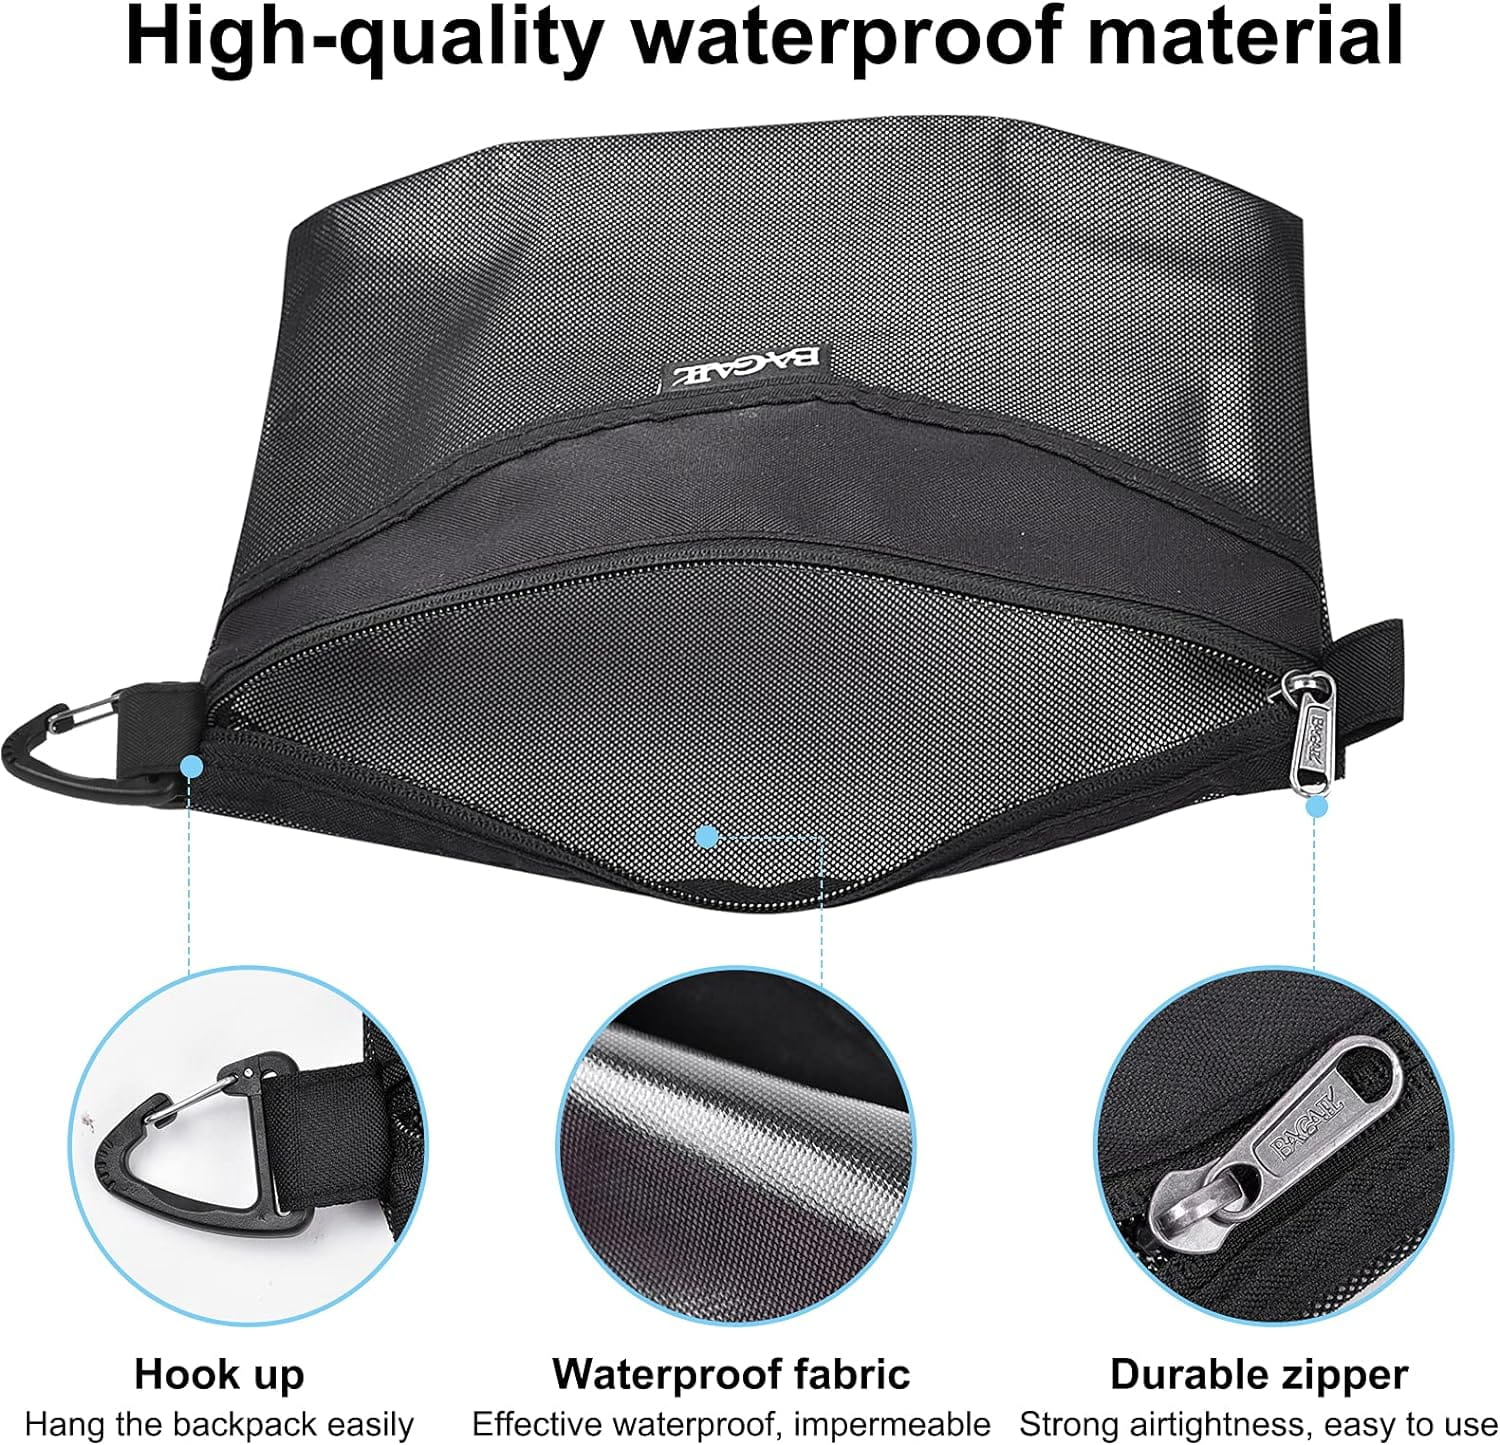 Bagail Water-resistant Airtight Zipper Pouch Ultra-light Travel Packing  Bags for Toiletries, Document, Electronics-Black